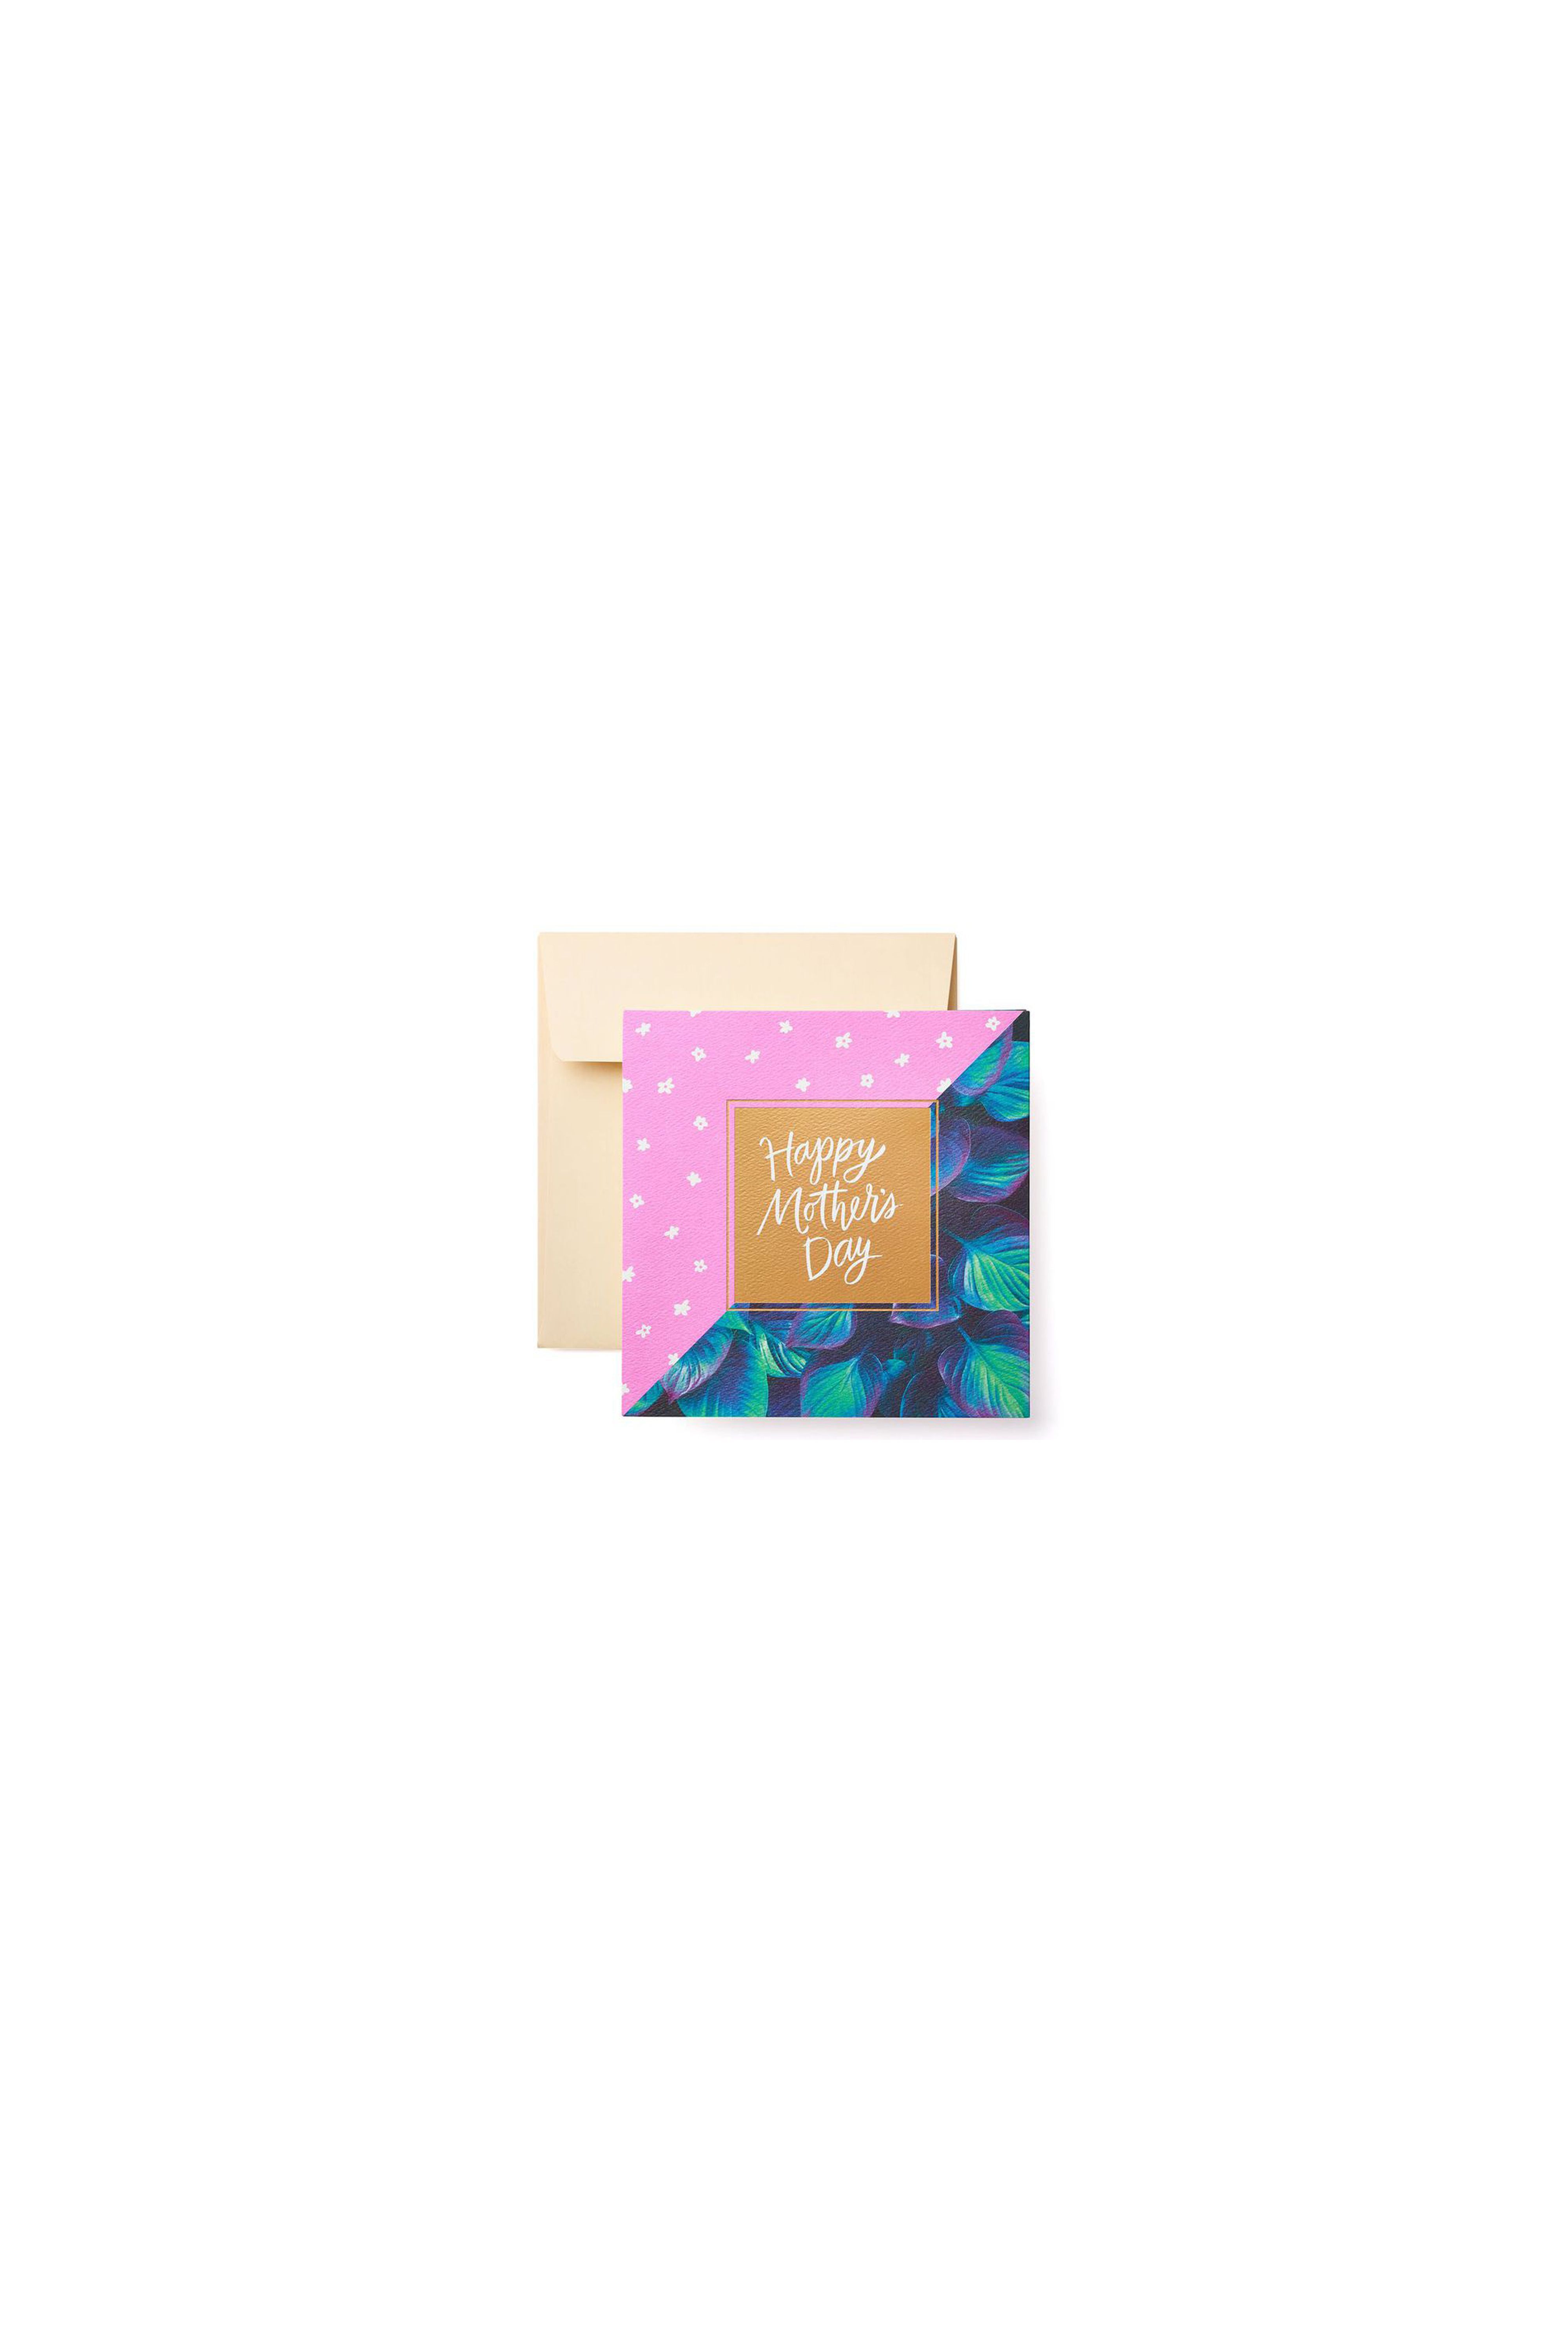 Blank Notecards Note Card Watercolor Just Because Card Mother's Day Cards Blank Card Calligraphy Greeting Card